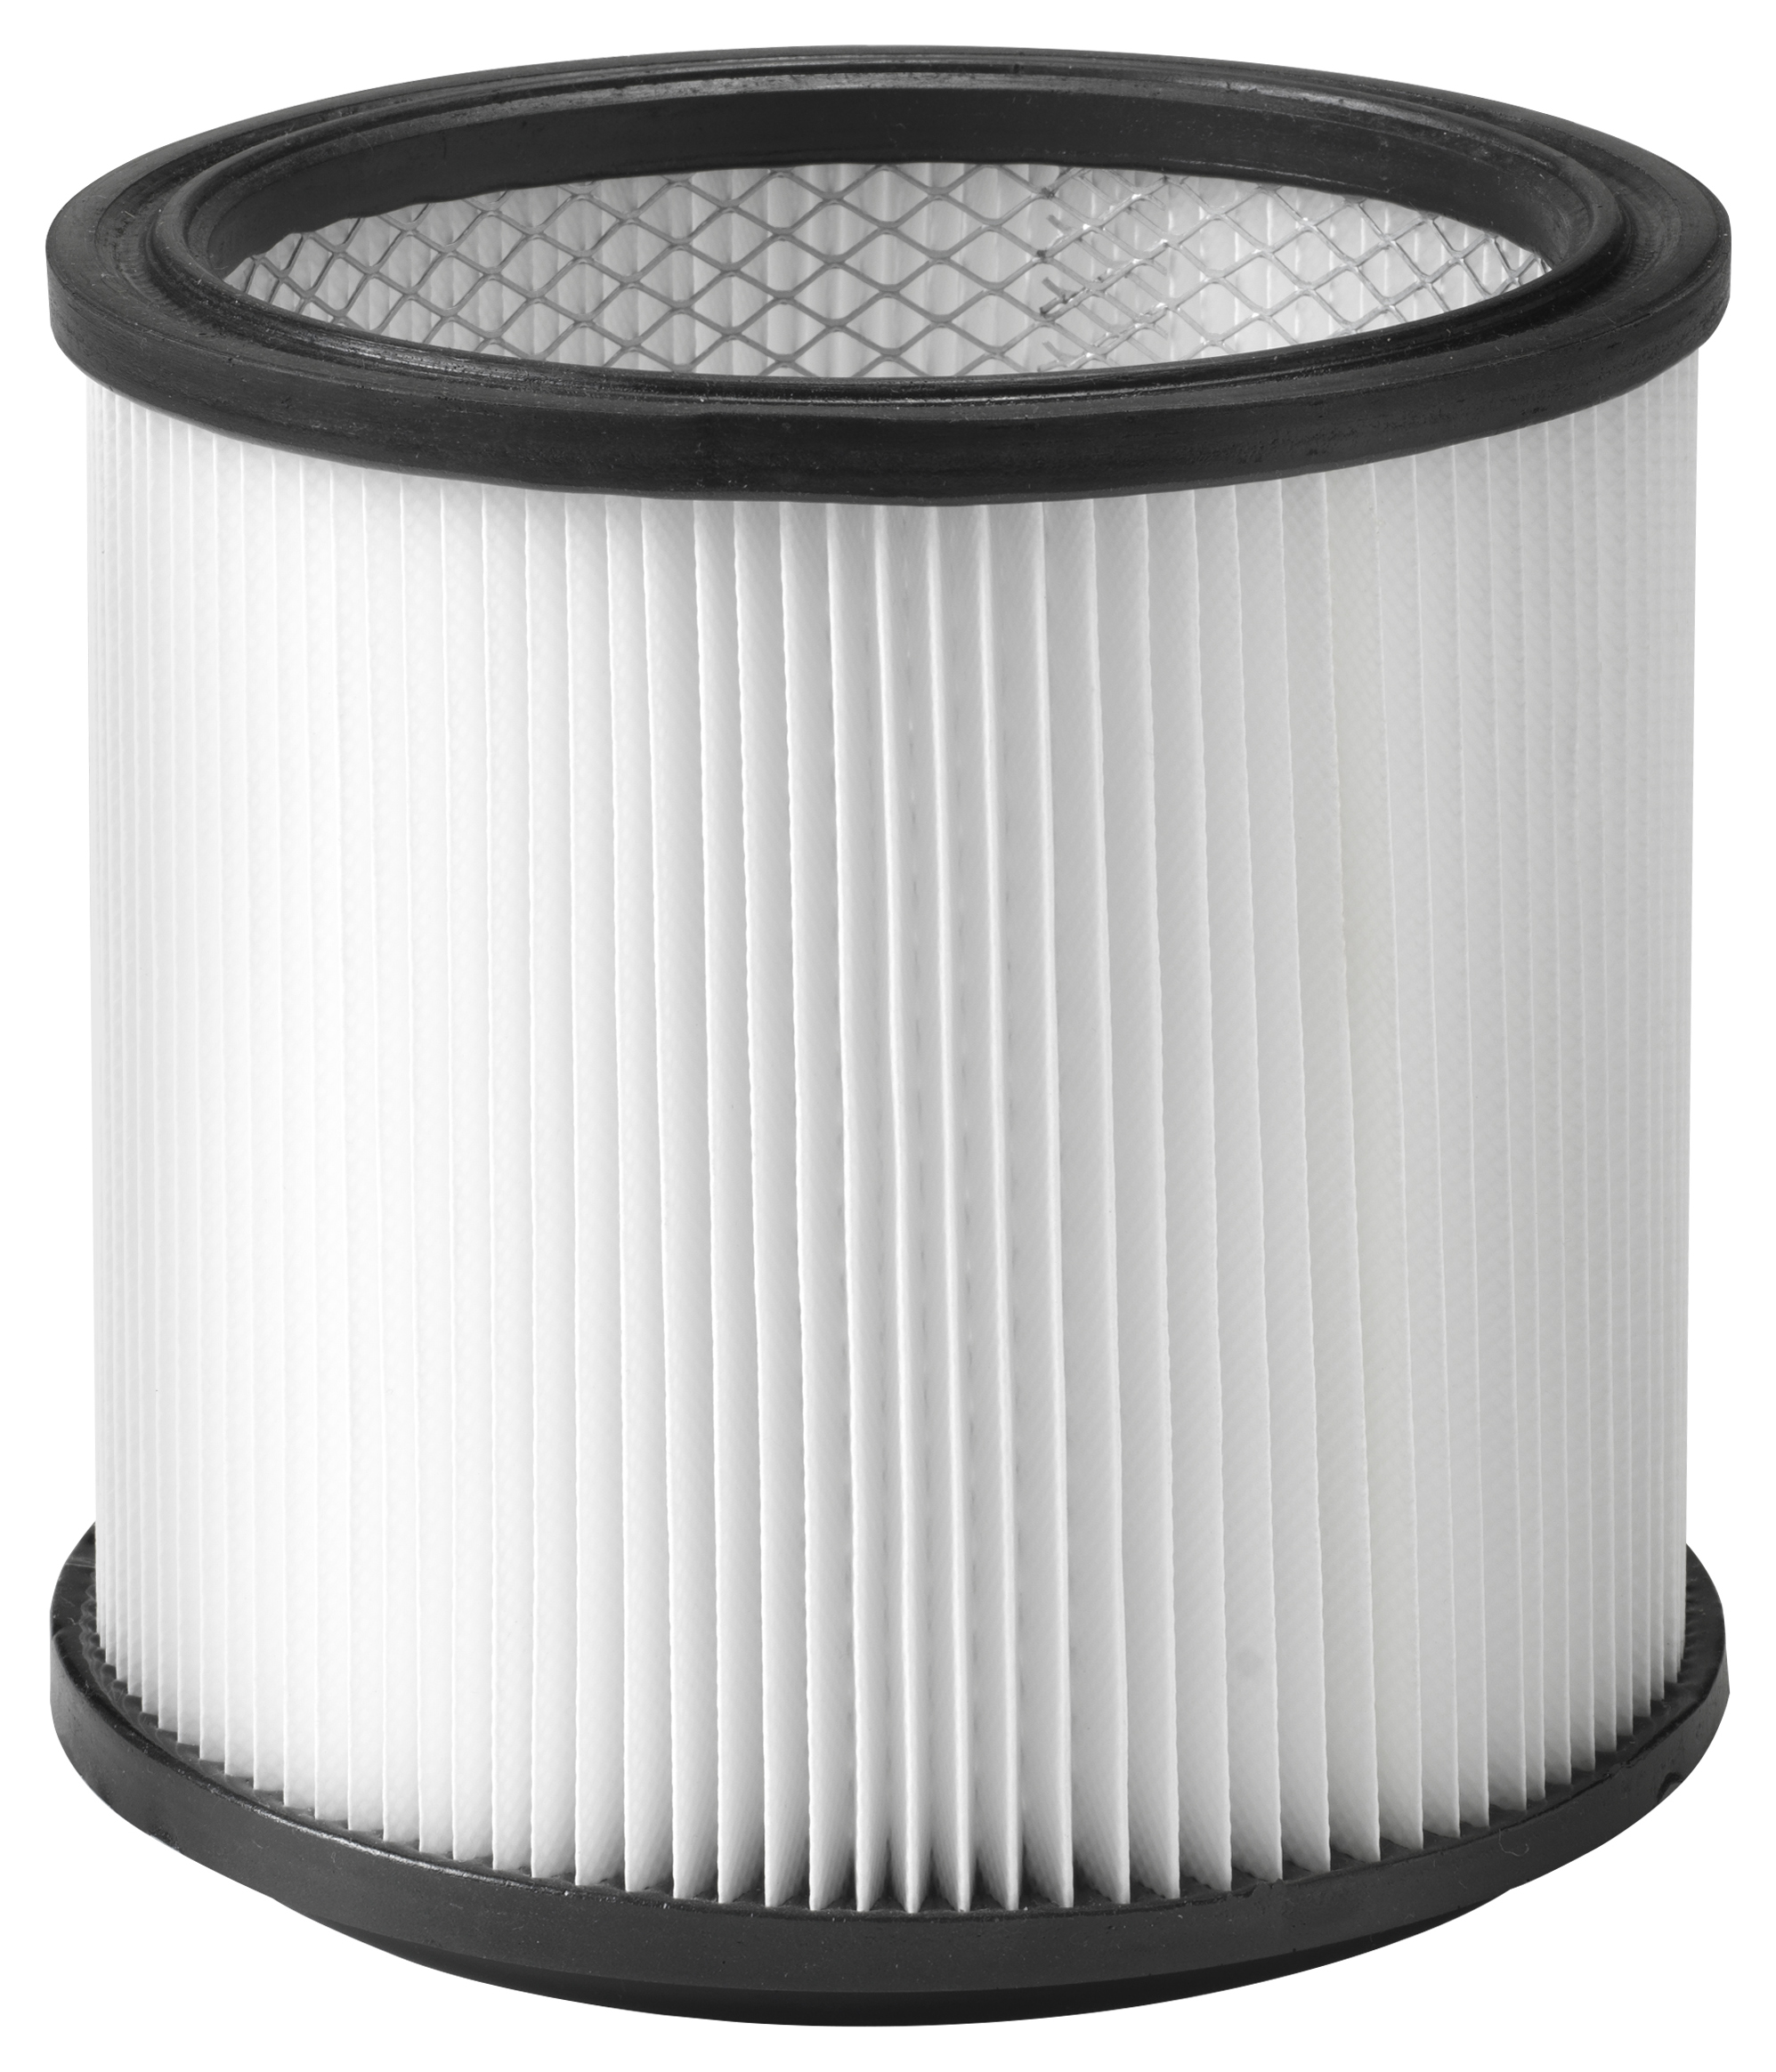 Vacmaster 951333 Universal Washable Wet & Dry Cartridge Filter 15L - 60L